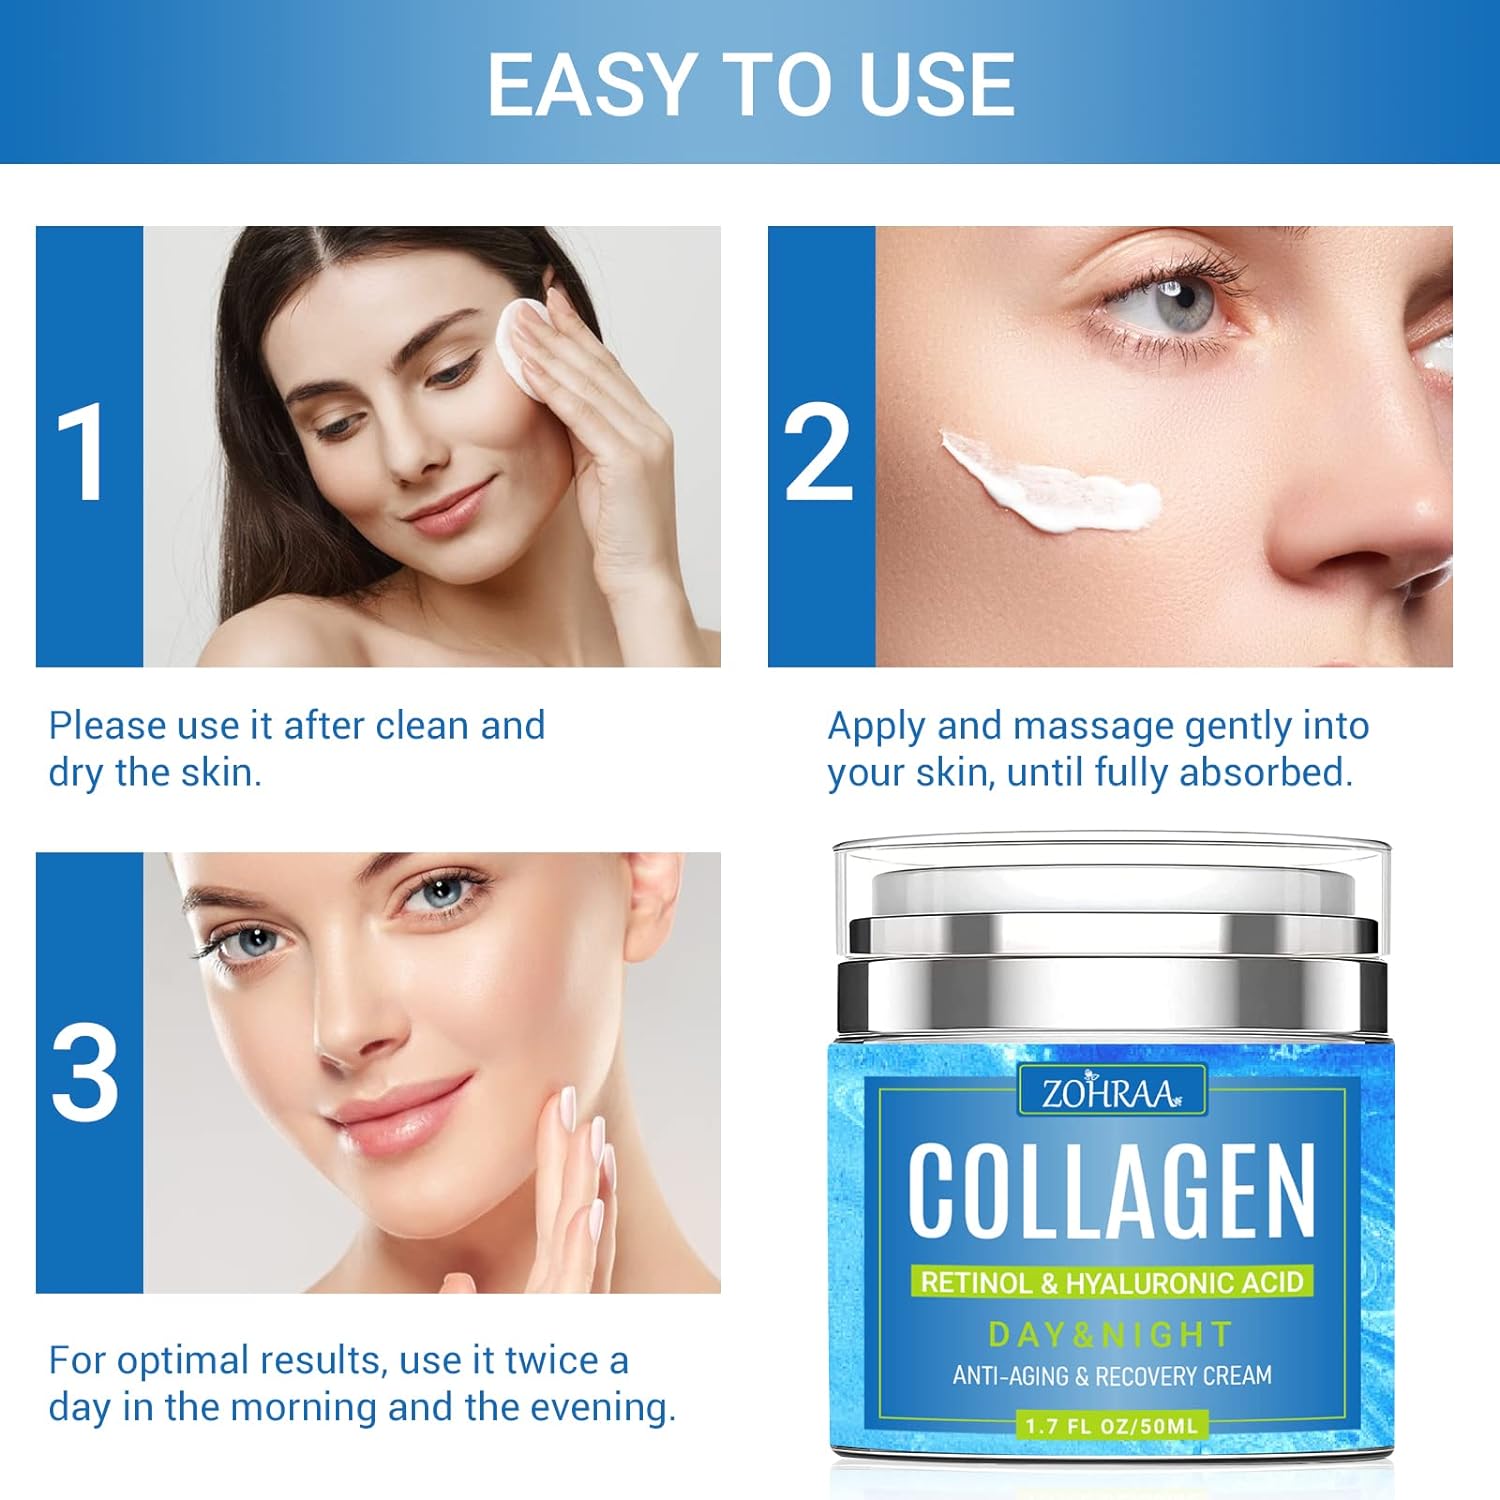 Face Moisturizer Collagen Cream - Anti Aging Neck and Décolleté Cream with Retinol  Hyaluronic Acid - Day  Night Face Cream to Smooth Wrinkles  Fine Lines - Anti Wrinkle Cream For Women and Men